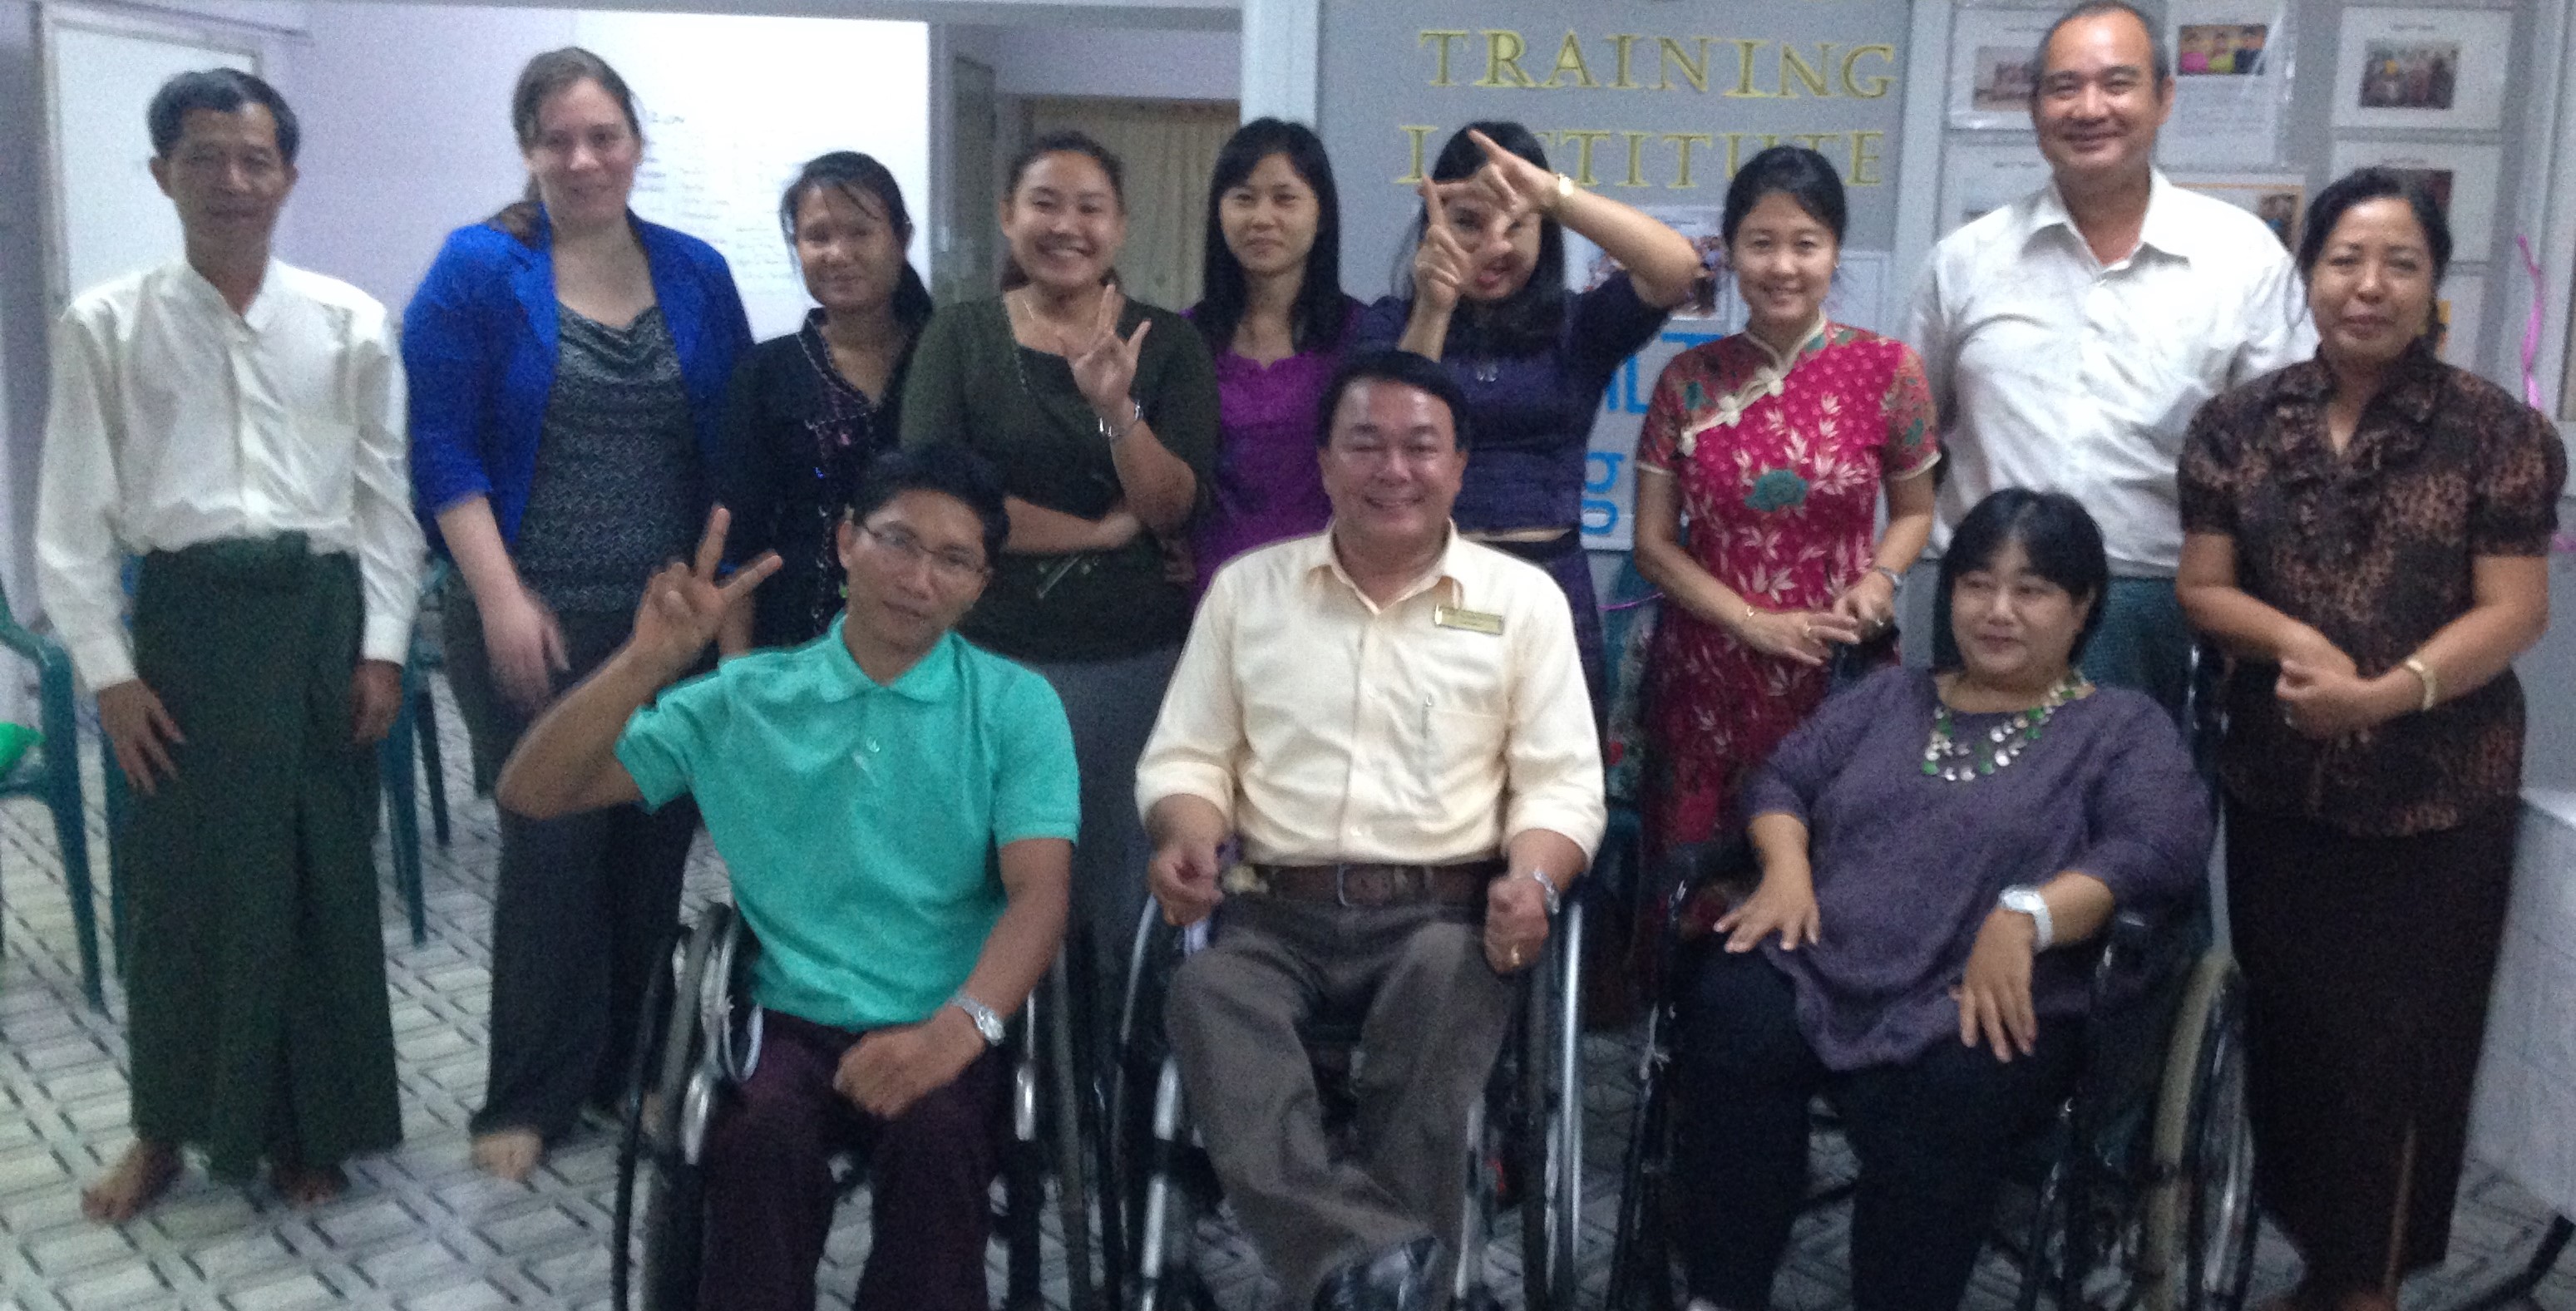 We Assist Countries with CRPD Implementation